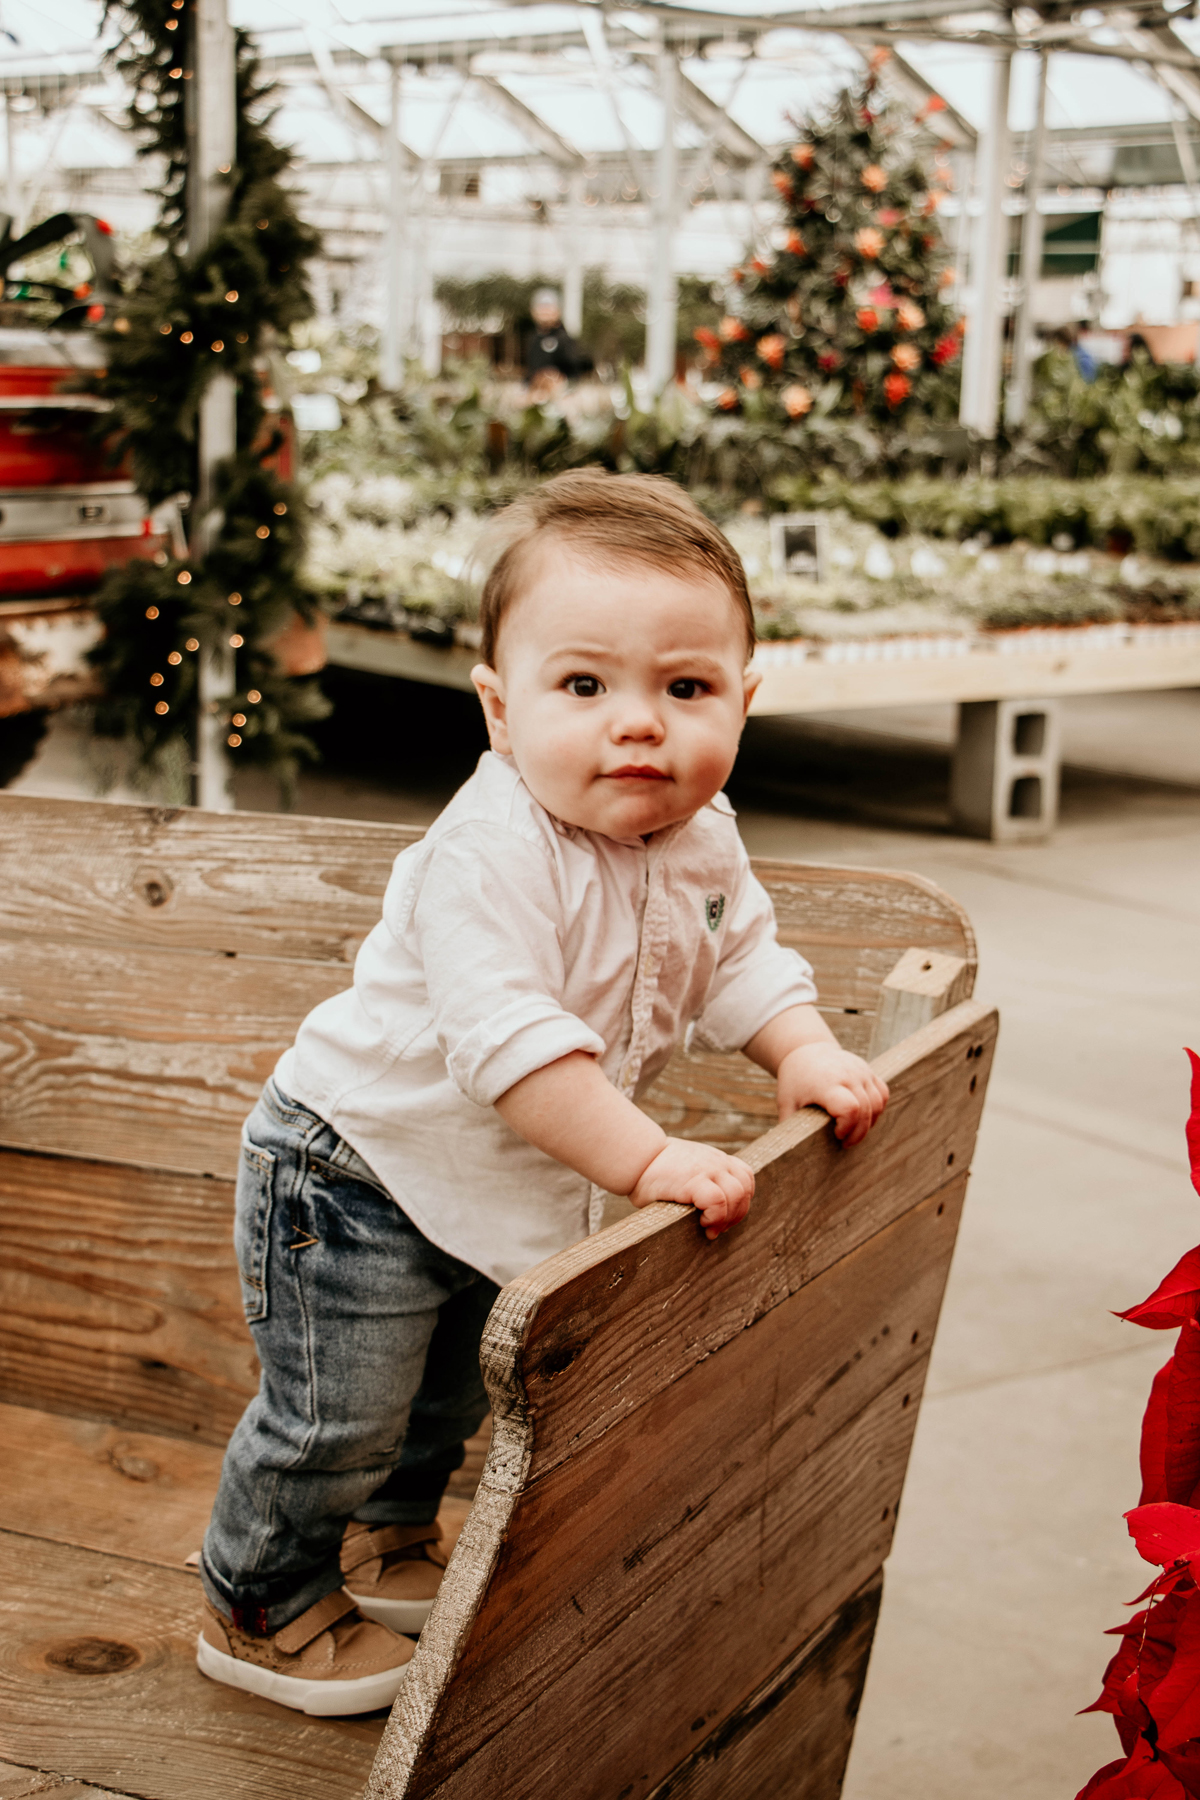 First Birthday Photos | Winter Family Photos with Baby | Christmas Family Pictures | Holiday Photos with Kids | Mulhall's | Omaha, Nebraska | theanastasiaco.com